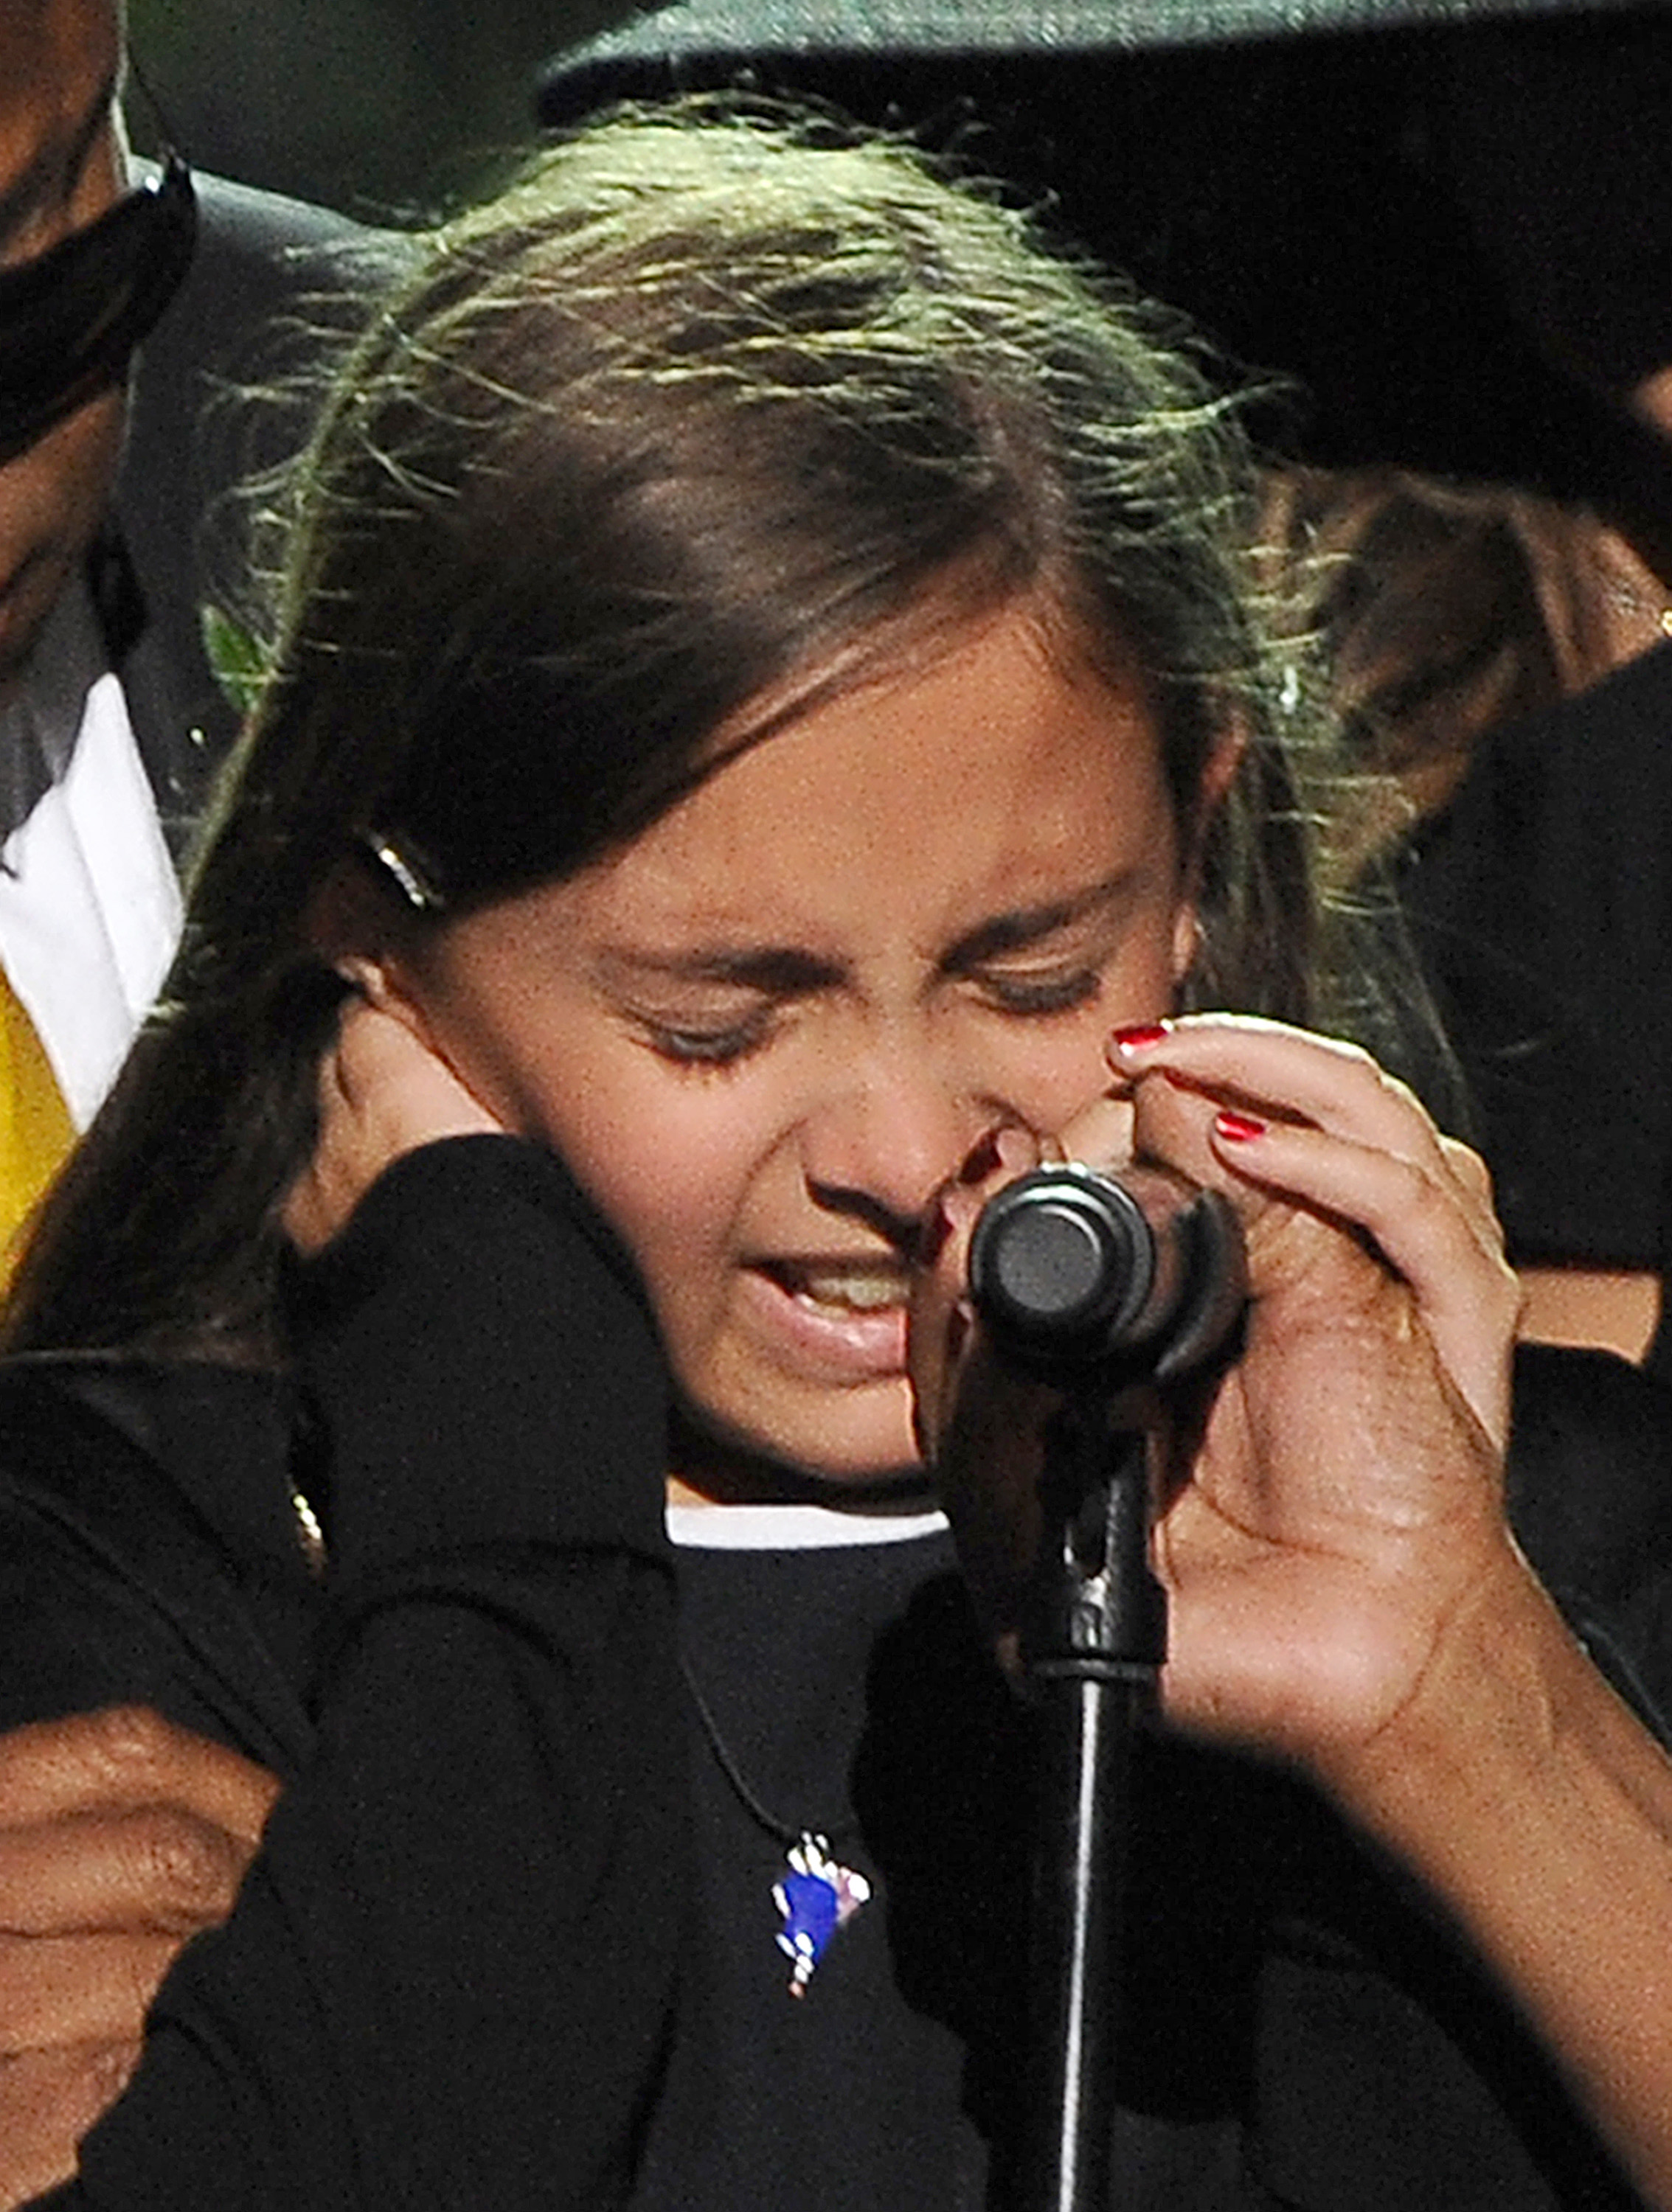 Paris Michael Katherine Jackson becomes emotional as she speaks during the Michael Jackson public memorial service at Staples Center on July 7, 2009, in Los Angeles, California | Source: Getty Images